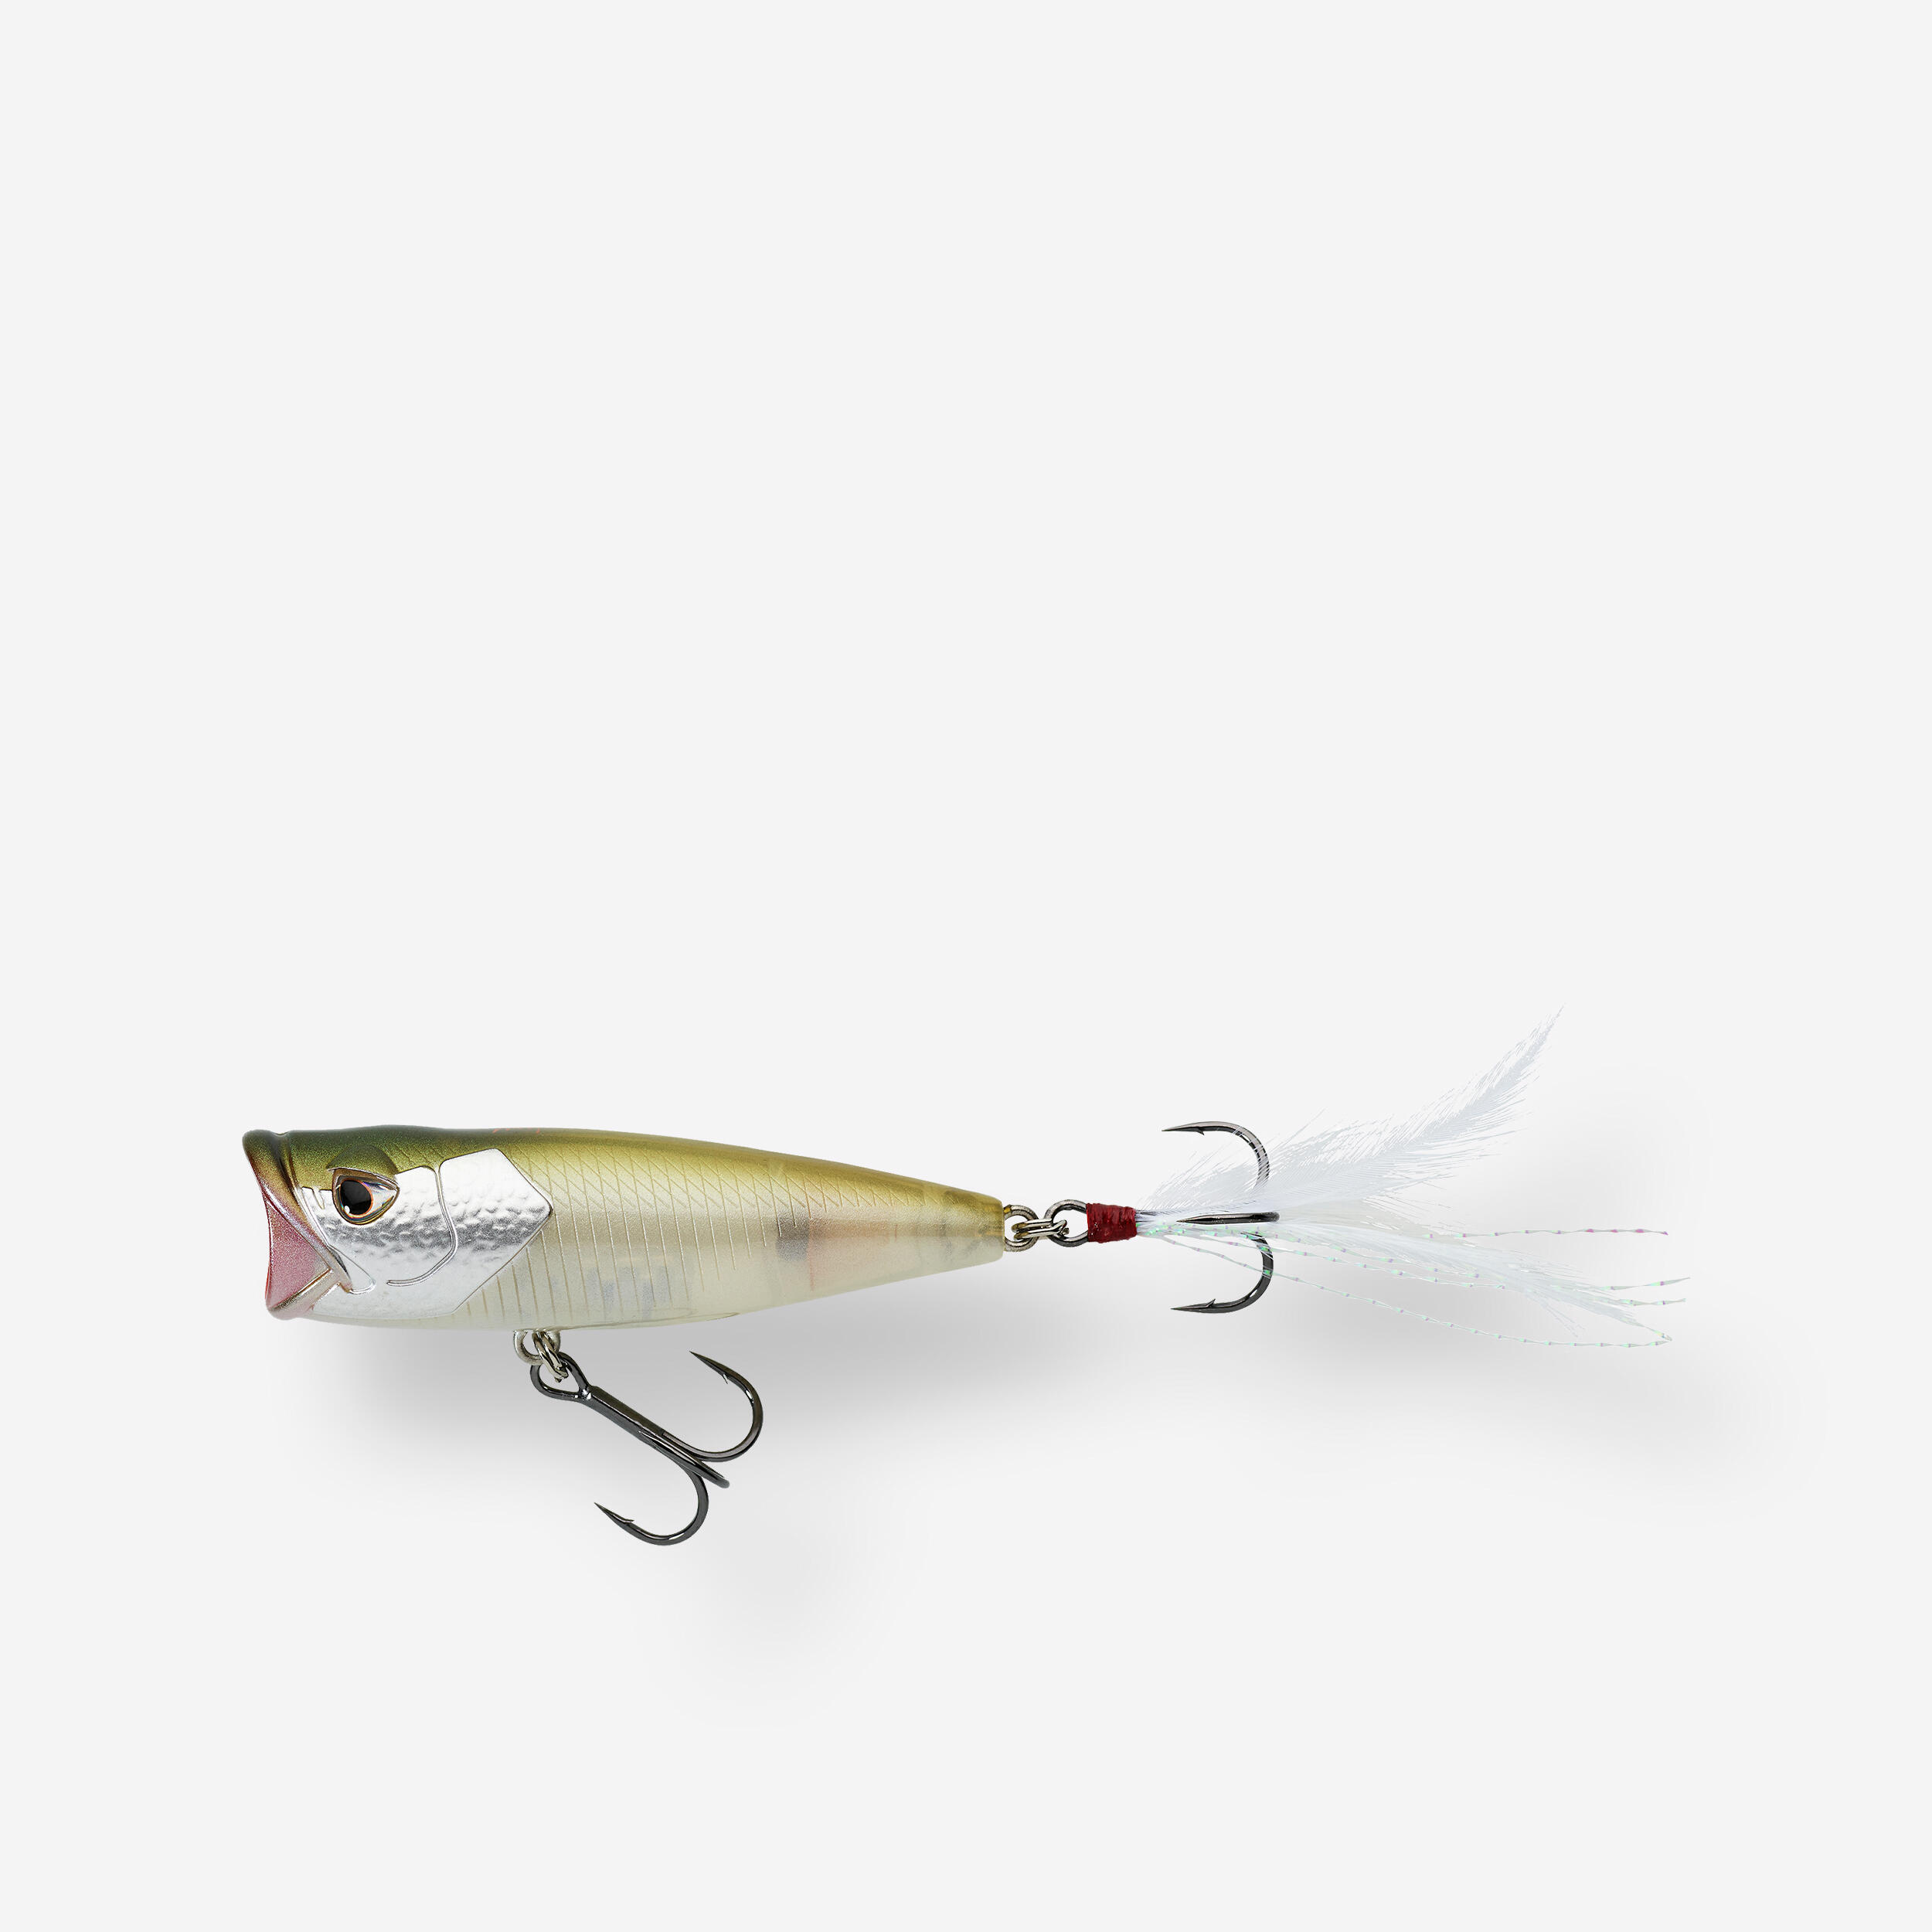 Fishing Hard Lure Popper 65F - Brown Back - One Size By CAPERLAN | Decathlon